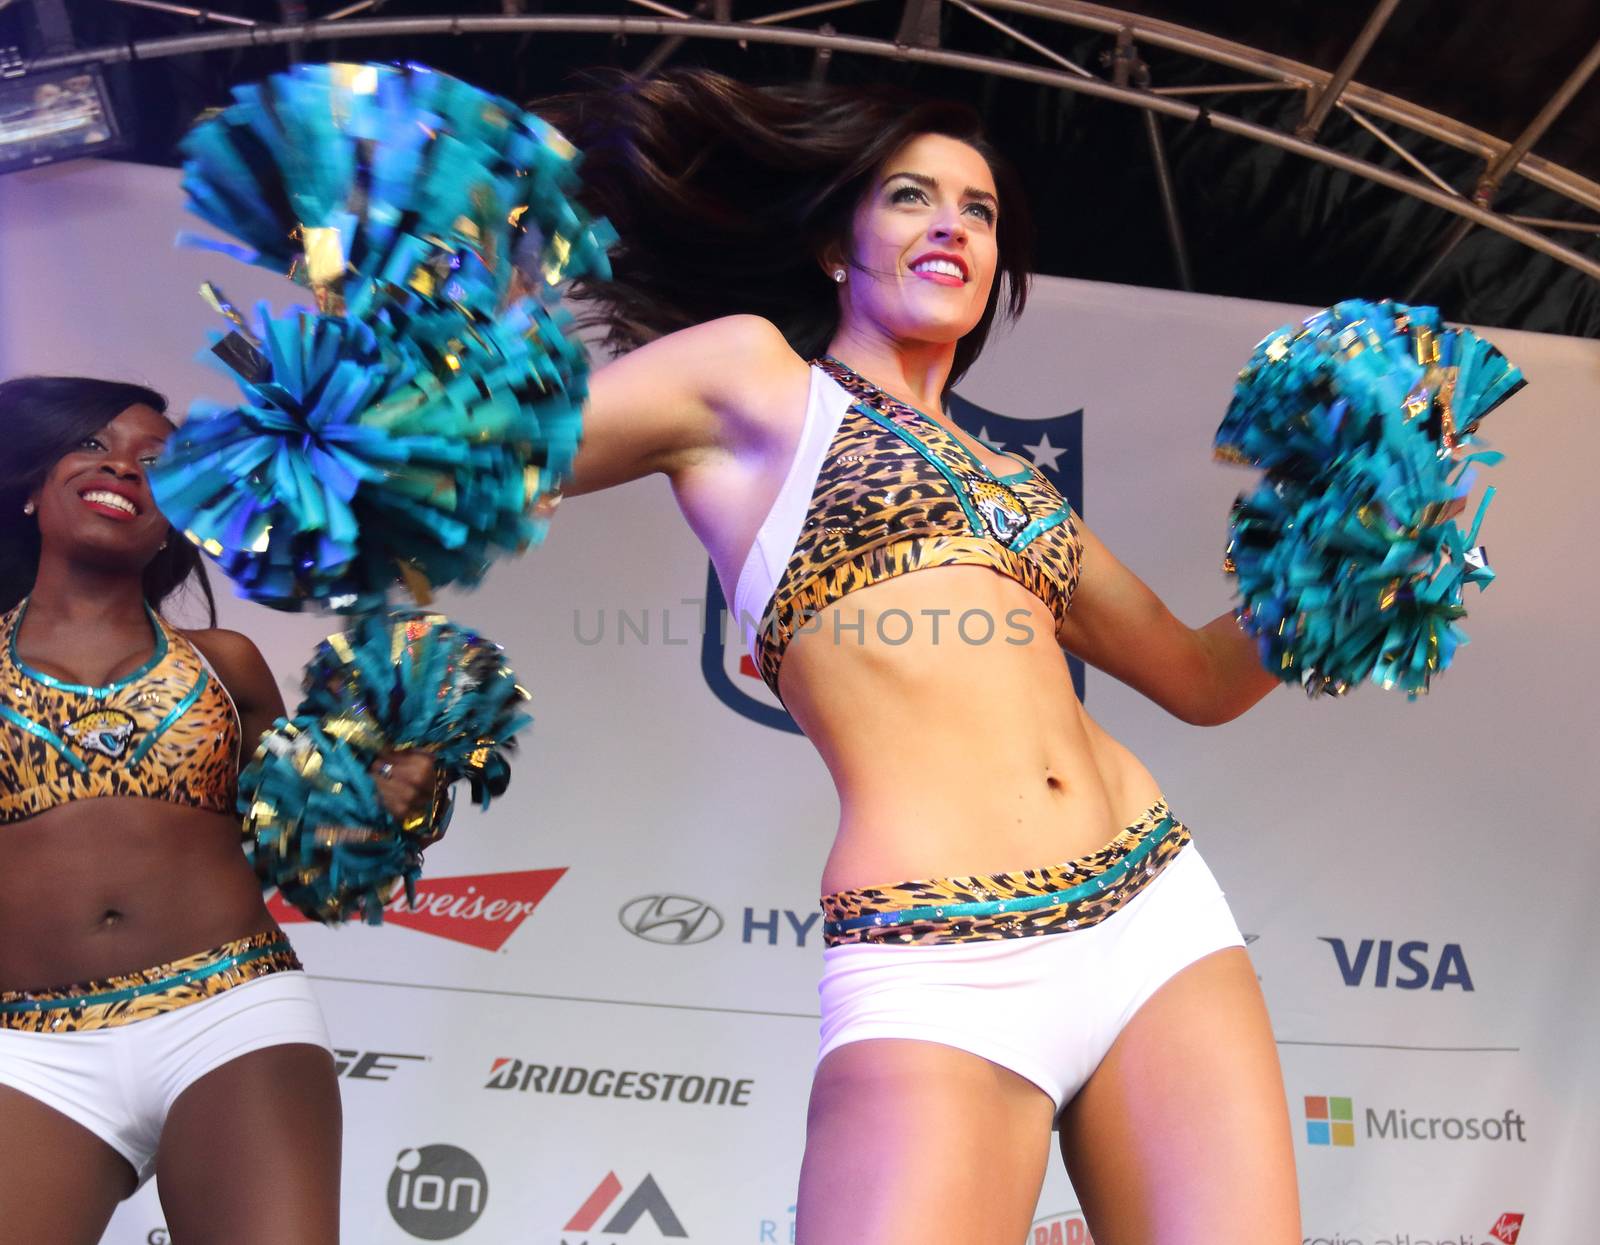 UNITED KINGDOM, London: Cheerleaders perform for thousands of fans at the American football festivities on October 24, 2015 before the regular-season NFL game between the Bills and the Jaguars is played at Wembley Stadium.  The NFL has been holding regular-season games in London since 2007, typically including an 'NFL on Regent Street' event the day before the game. 